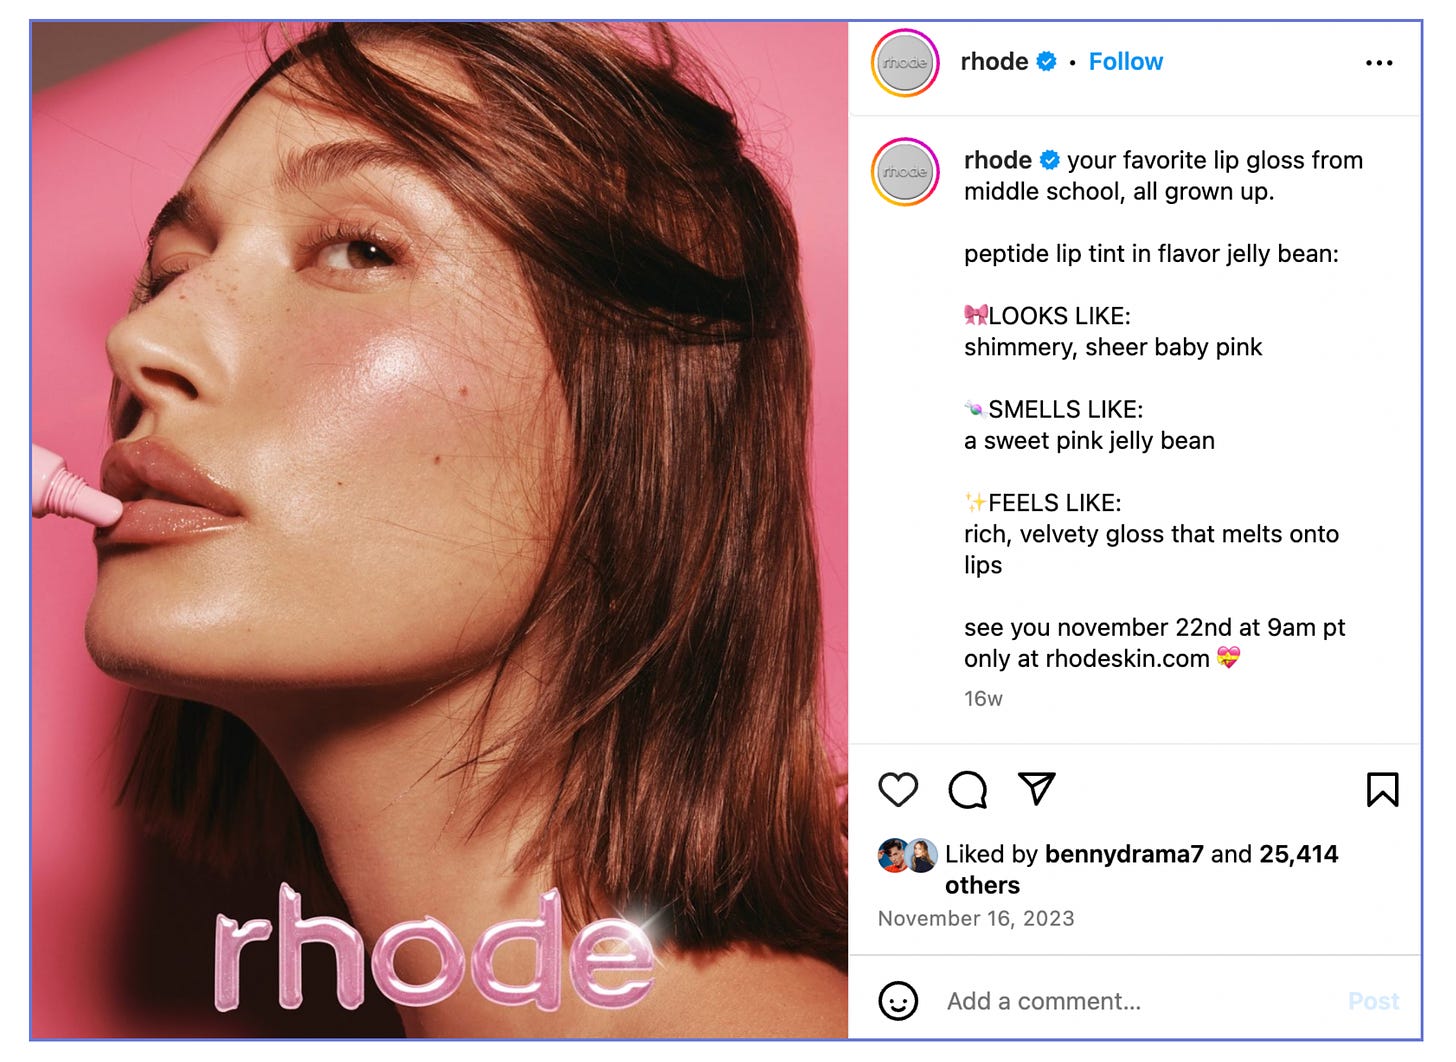 Rhode IG Post with caption "your favorite lip gloss from middle school, all grown up.  peptide lip tint in flavor jelly bean:  🎀LOOKS LIKE: shimmery, sheer baby pink  🍬SMELLS LIKE: a sweet pink jelly bean  ✨FEELS LIKE: rich, velvety gloss that melts onto lips  see you november 22nd at 9am pt only at rhodeskin.com 💝"